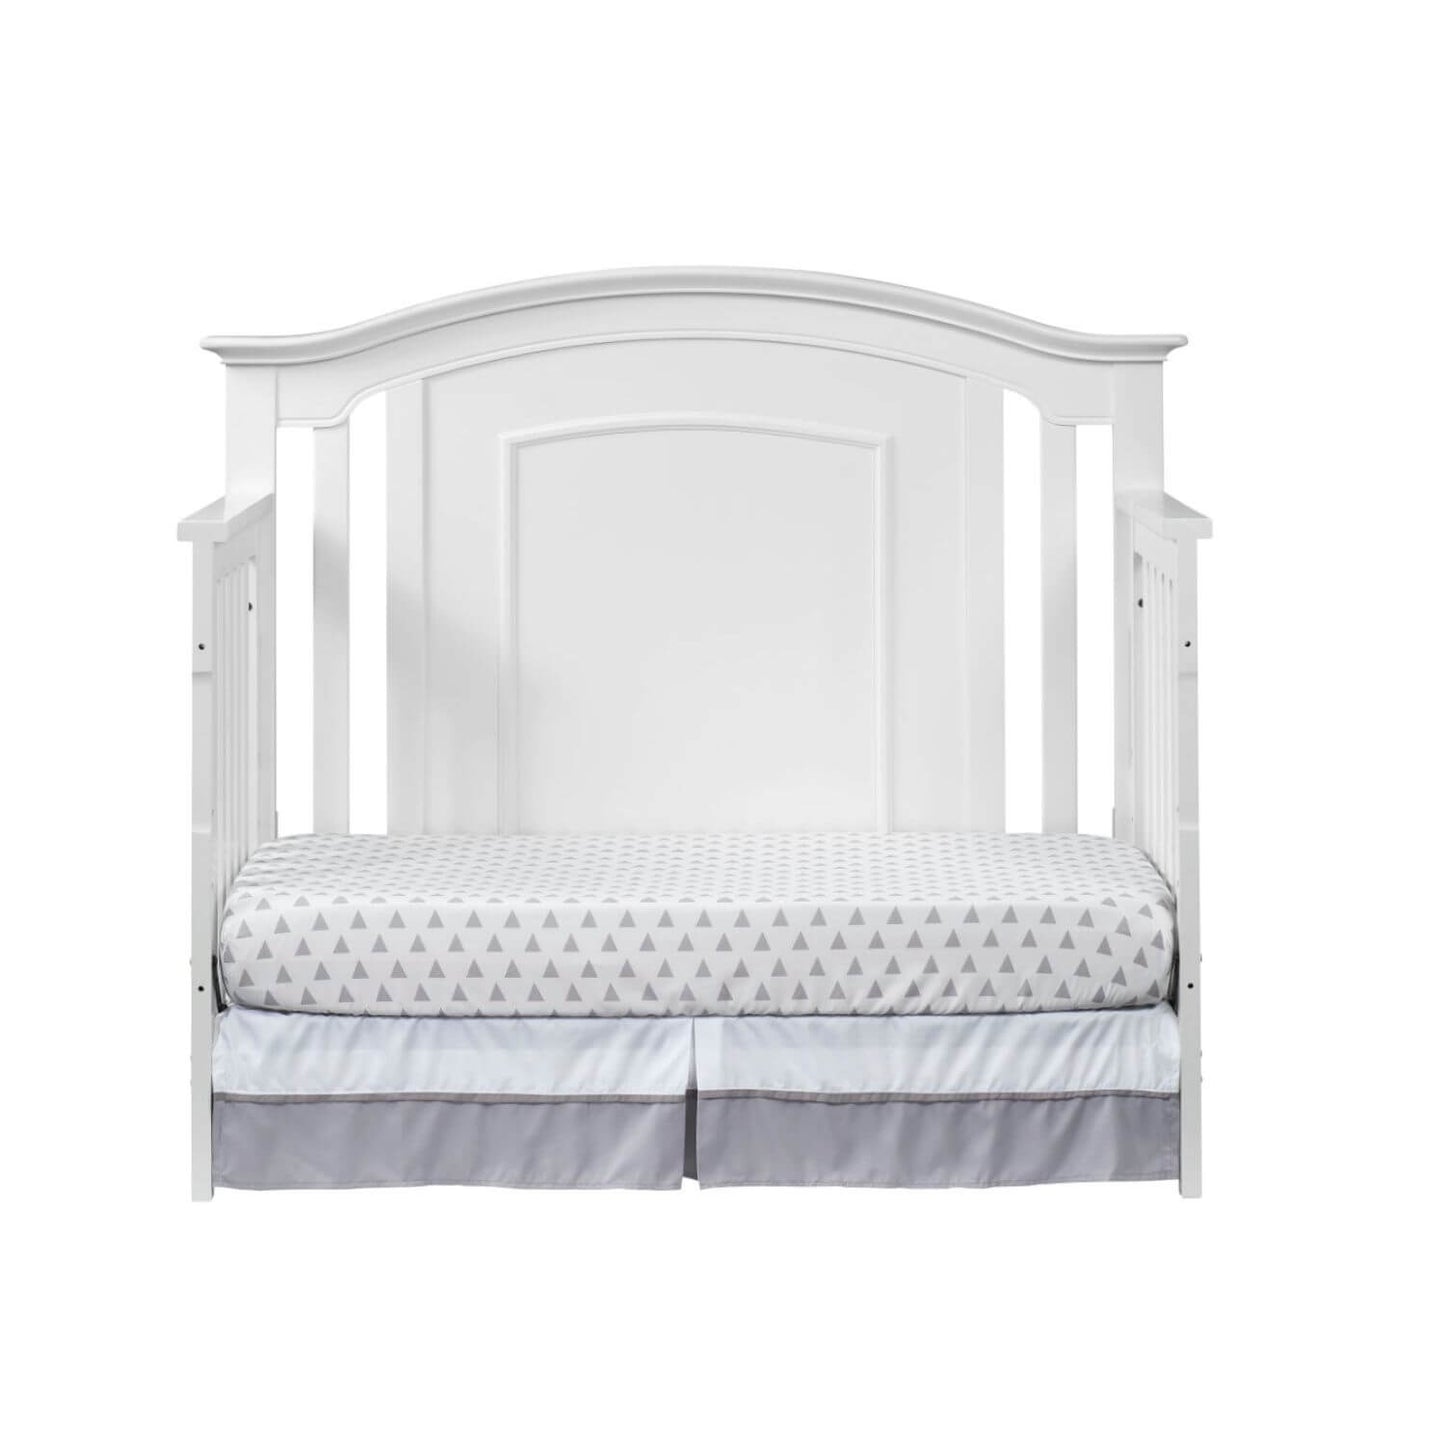 Oxford Baby Willowbrook 4-in-1 Convertible Crib | White